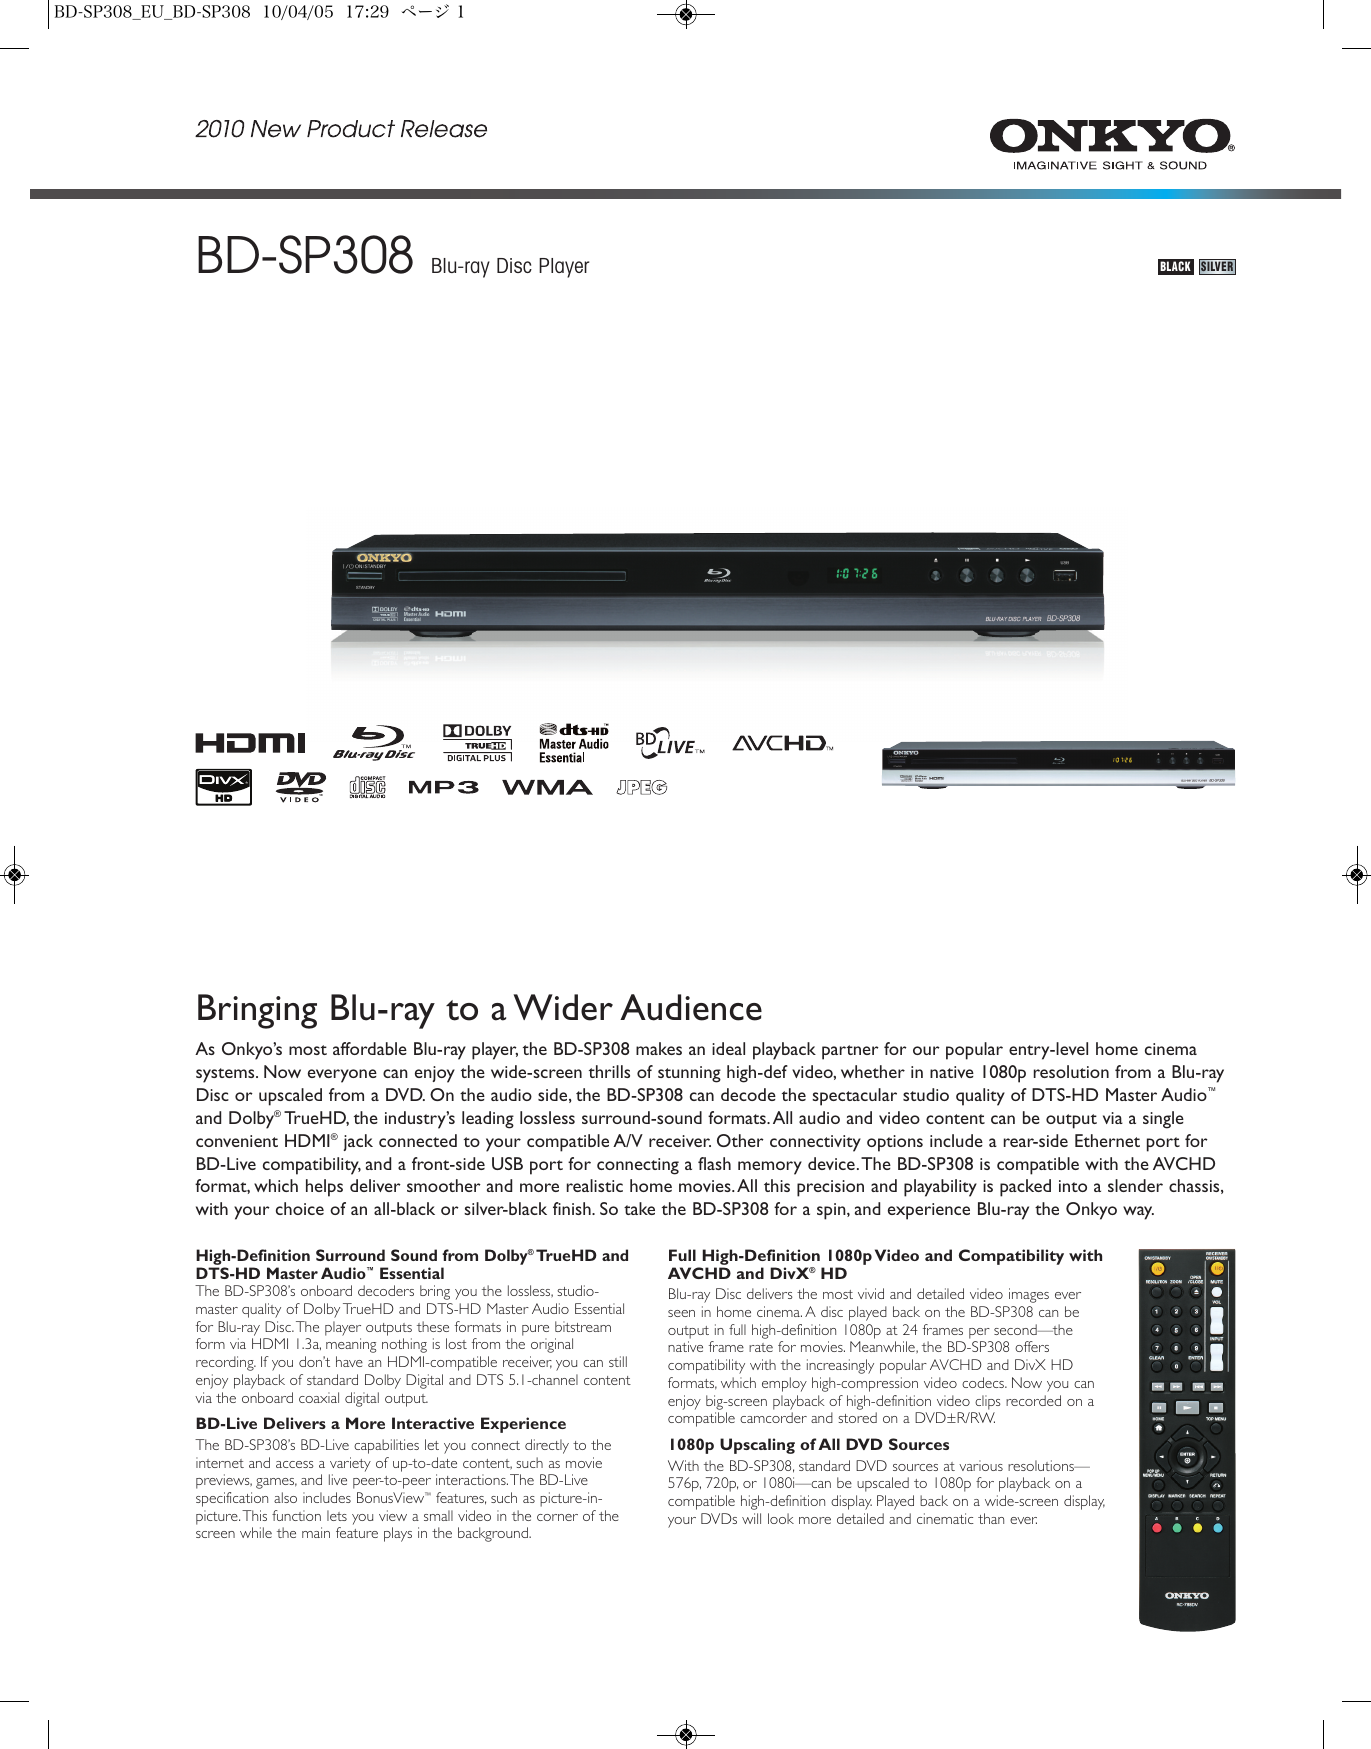 Page 1 of 2 - Onkyo Onkyo-Blu-Ray-Player-Bd-Sp308-Users-Manual- A-5VL_US  Onkyo-blu-ray-player-bd-sp308-users-manual